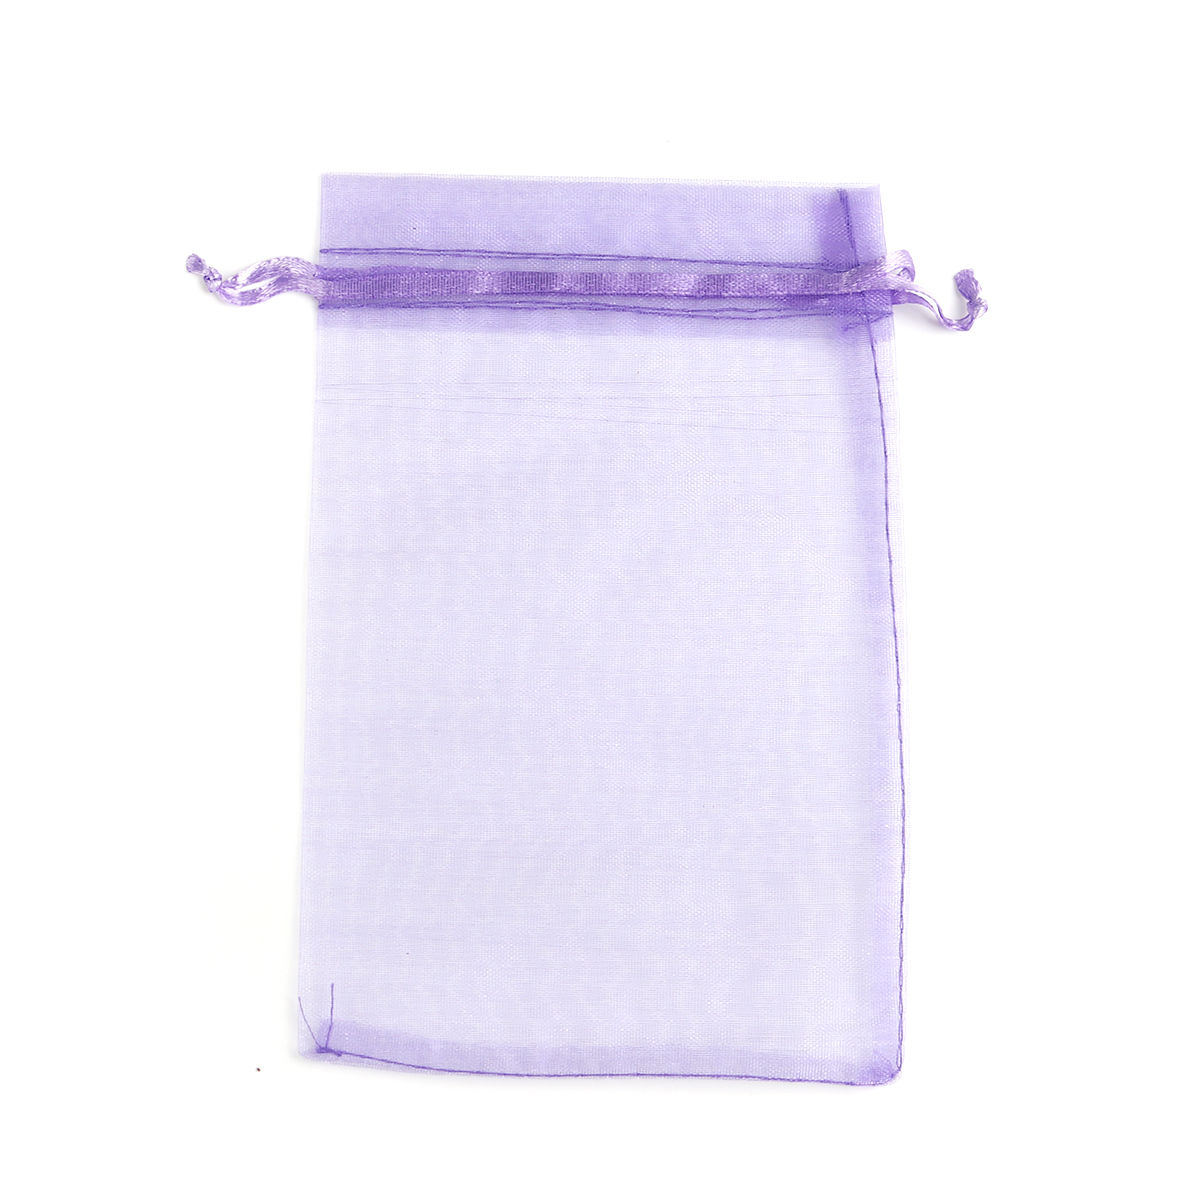 Picture of Wedding Gift Organza Jewelry Bags Drawstring Rectangle Violet (Usable Space: 13.5x10.5cm) 16cm x 11cm, 20 PCs